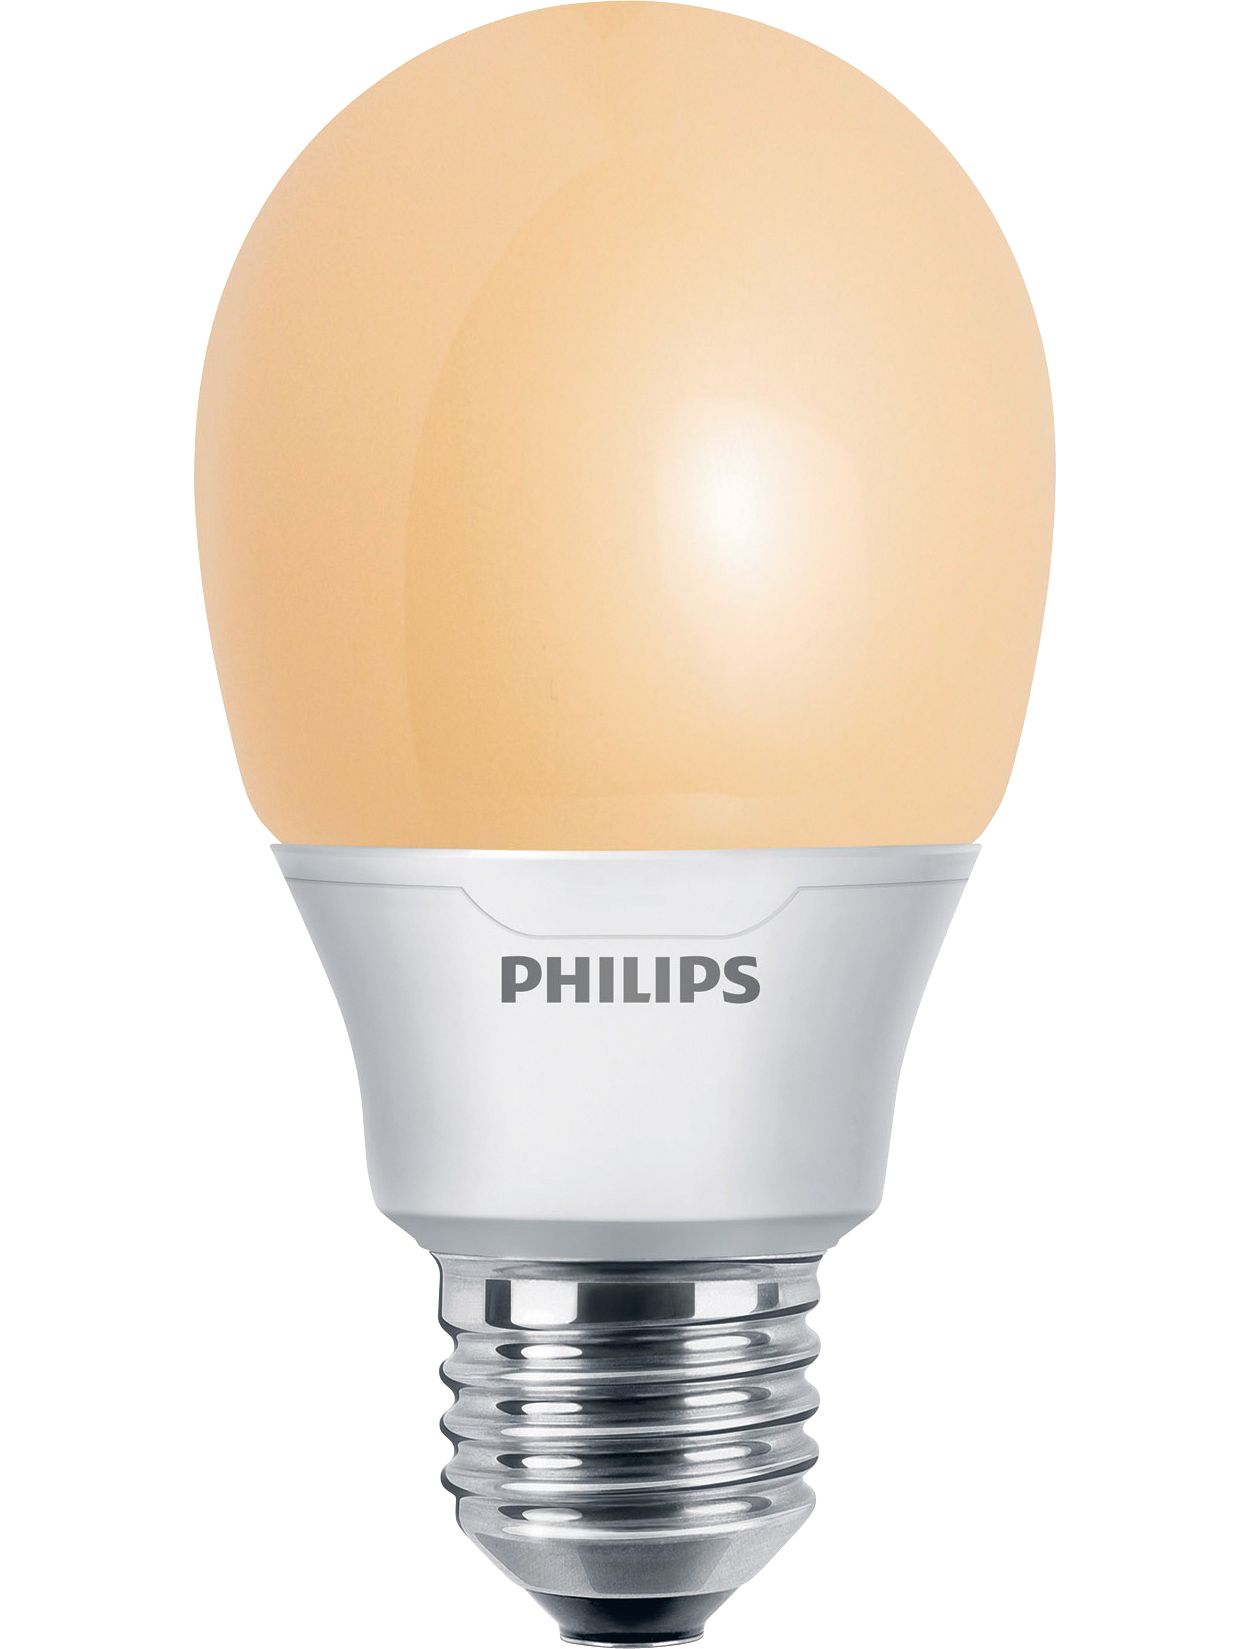 Mislukking Vooruitgaan Geven Softone Flame 11W E27 220-240V A55 1PF/6 | 929689198202 | Philips lighting